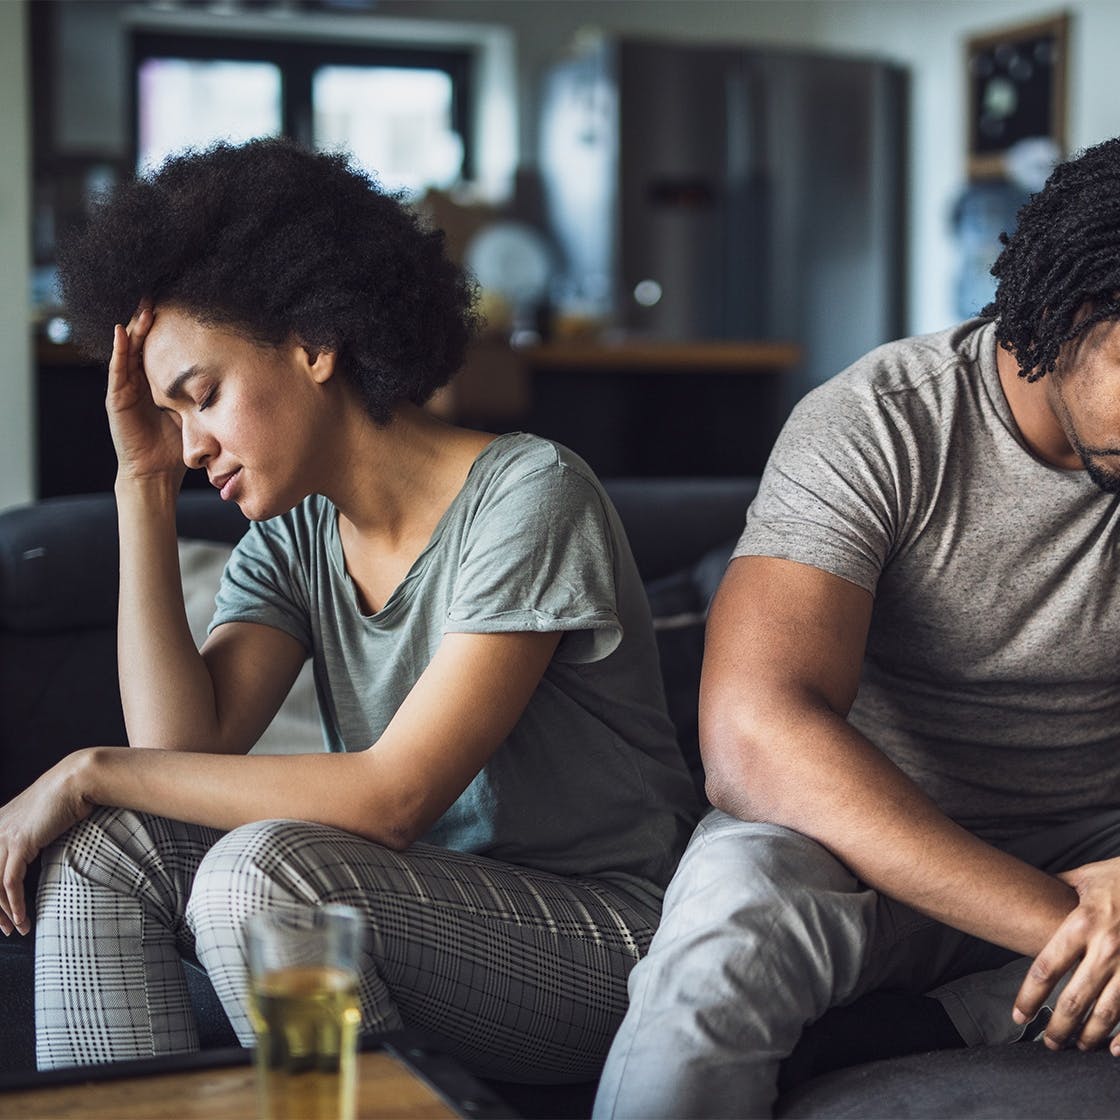 5 Reasons To Make Your Healthy Relationship Worse